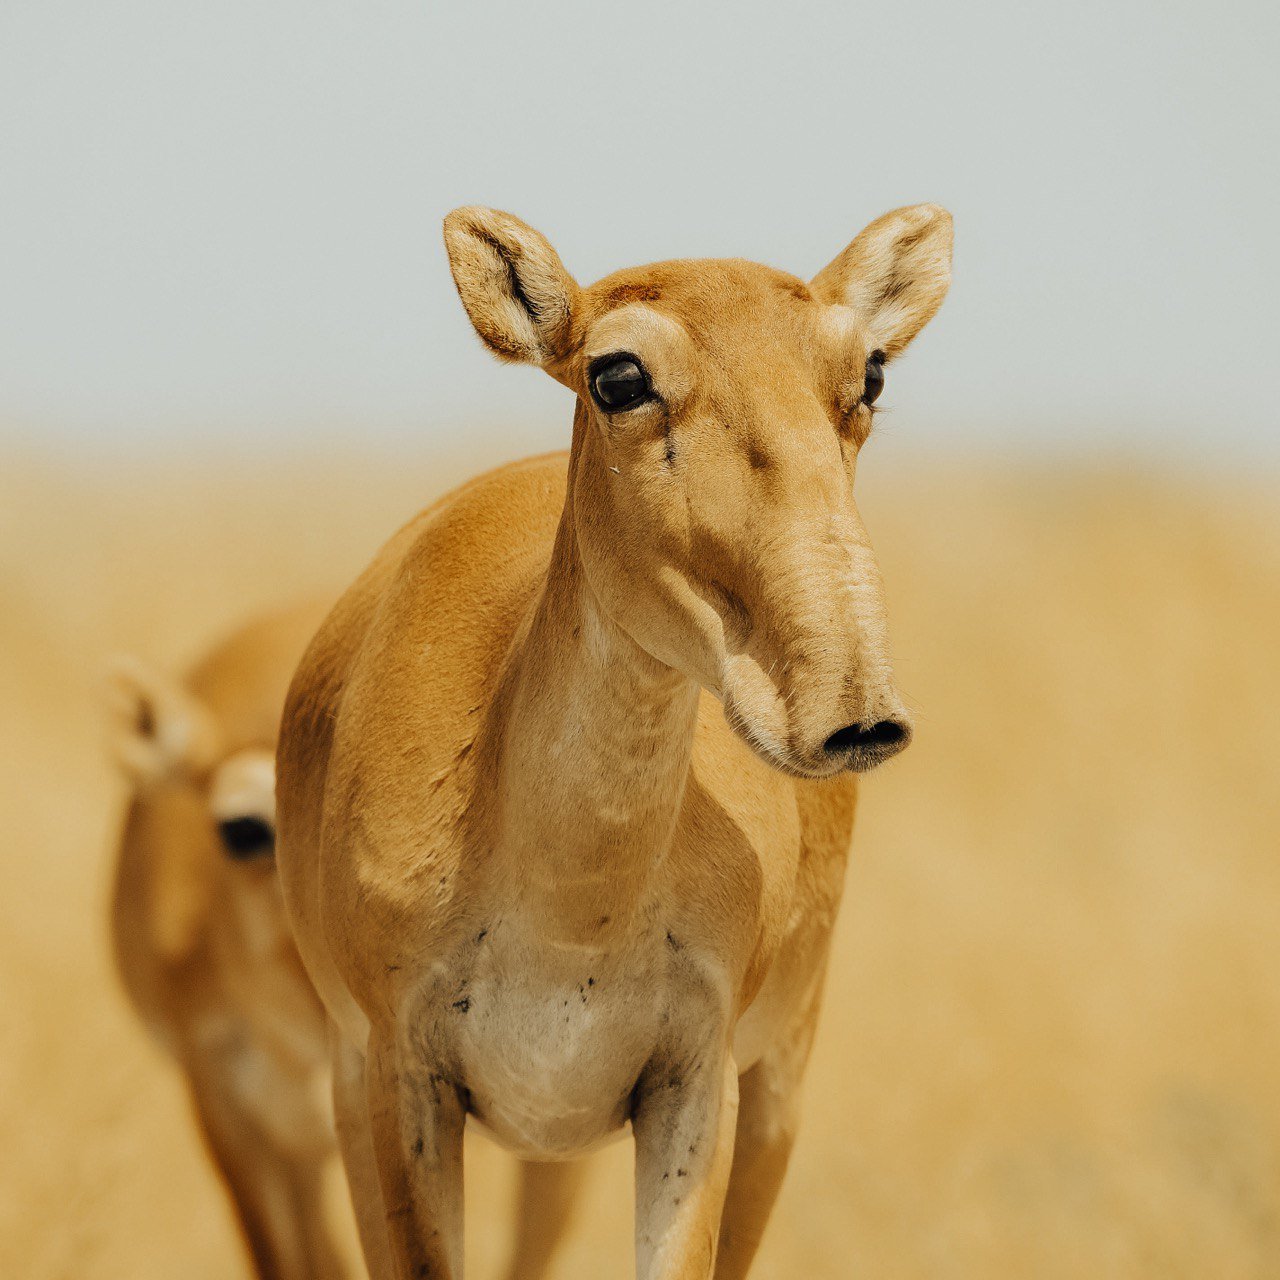 <p>The floppy nosed saiga antelope&#8217;s population doubled in Kazakhstan and Russia in 2019 [image courtesy: Okhotzooprom, 2020]</p>